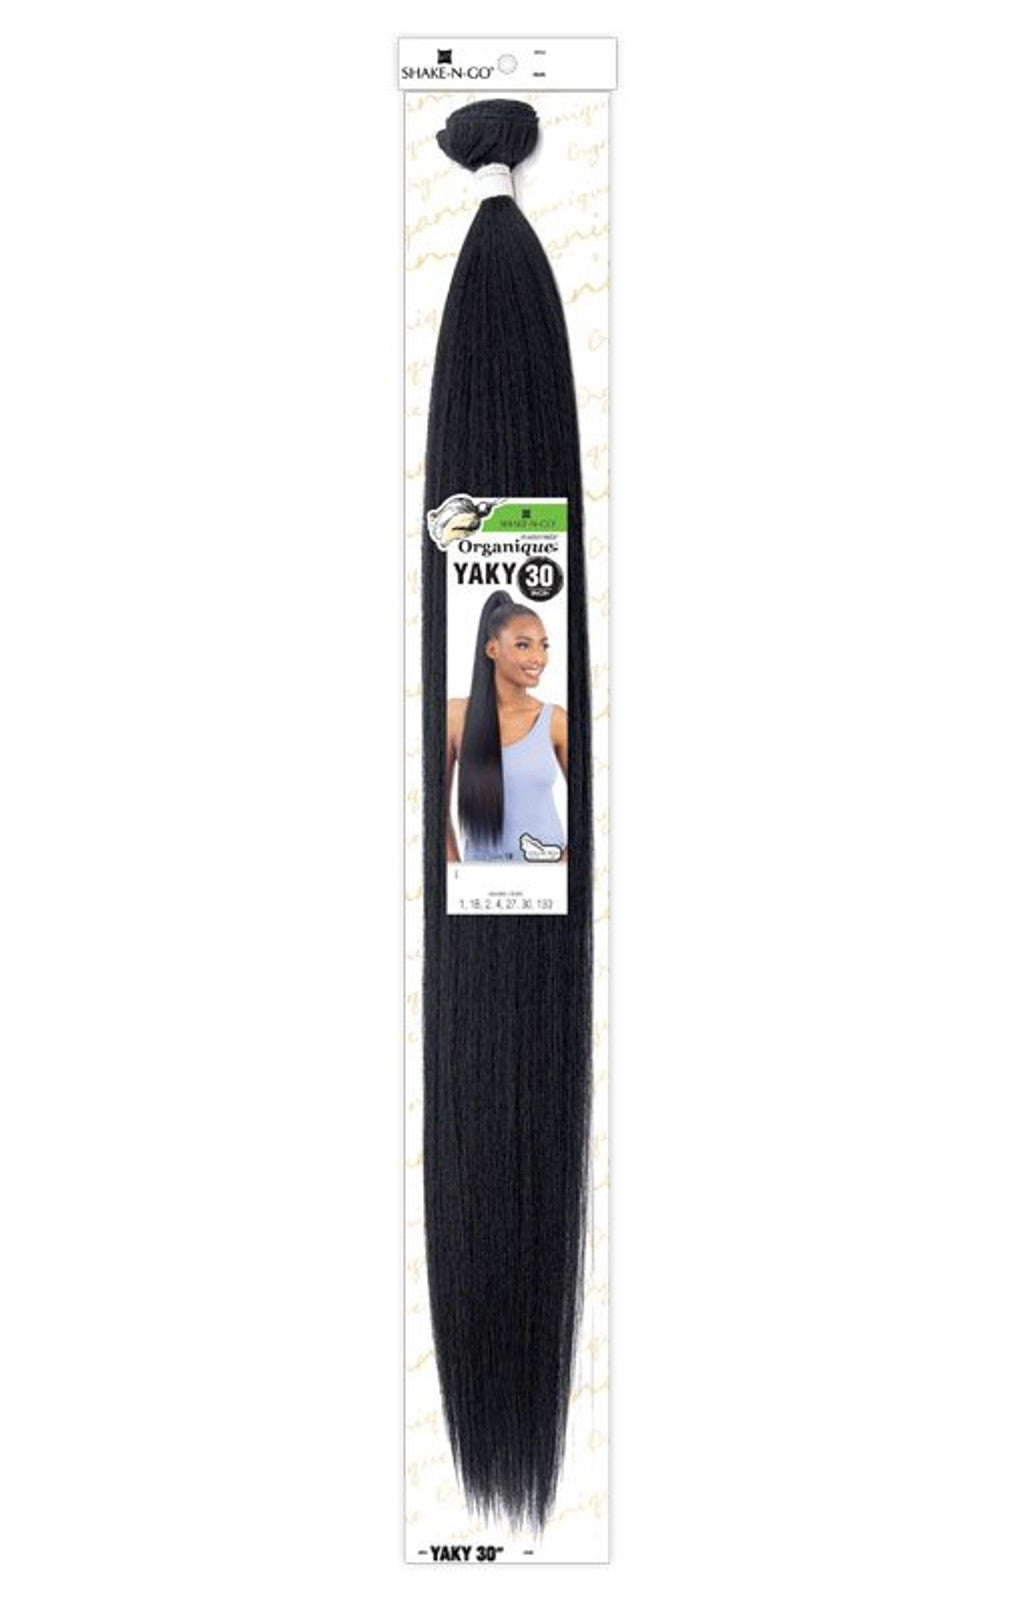 SHAKE N GO Organique Master Mix Weave Straight - 30"